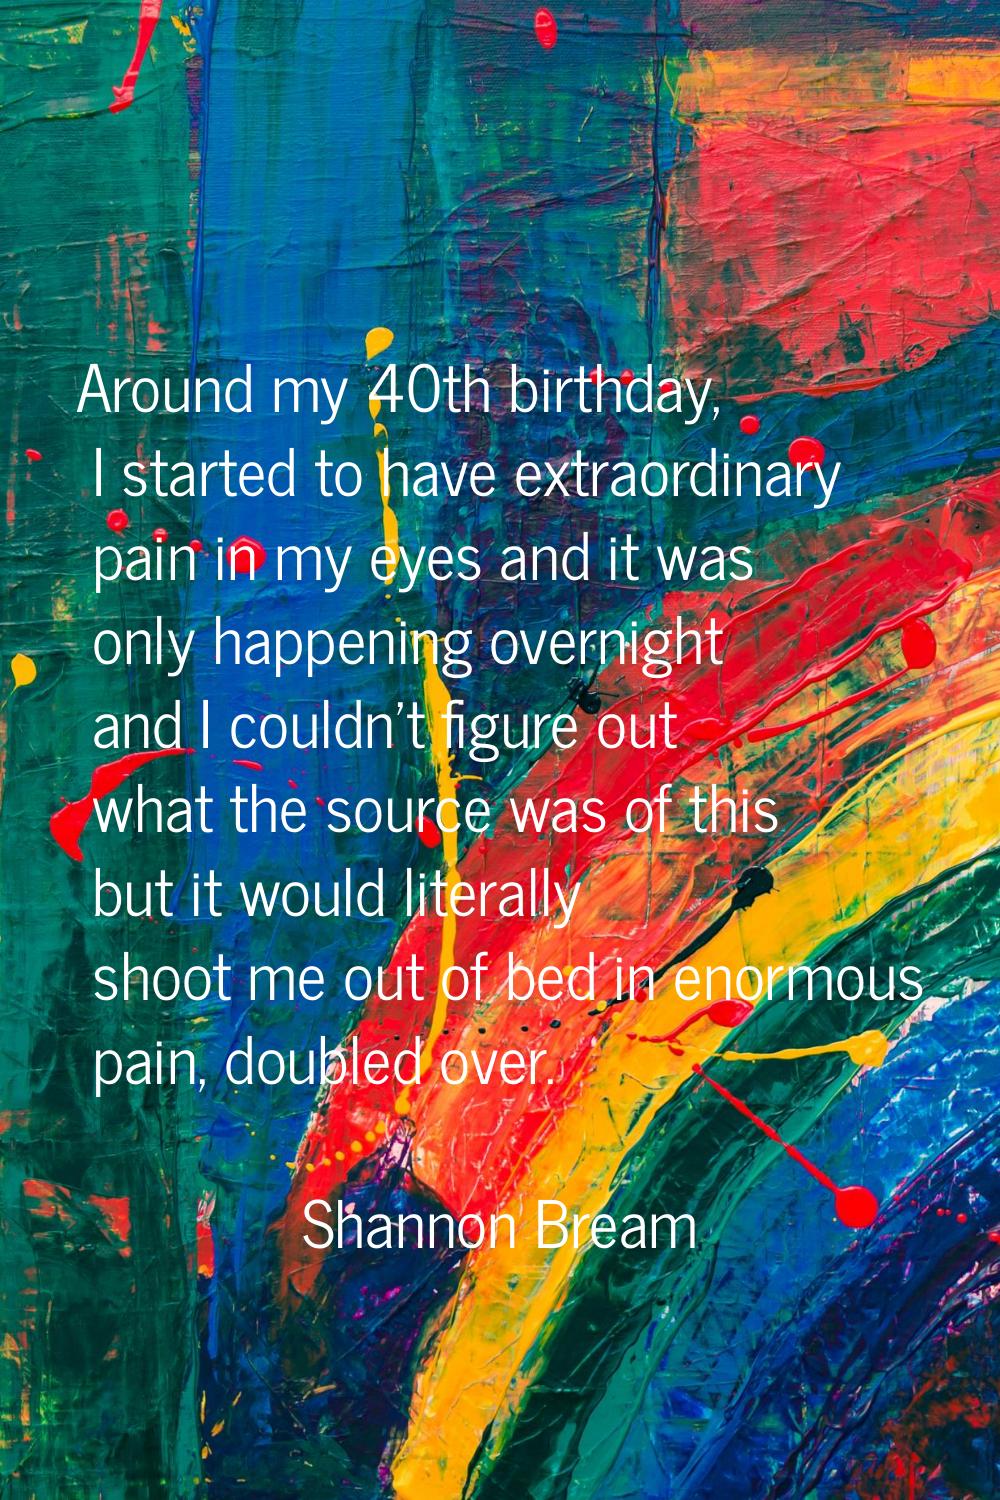 Around my 40th birthday, I started to have extraordinary pain in my eyes and it was only happening 